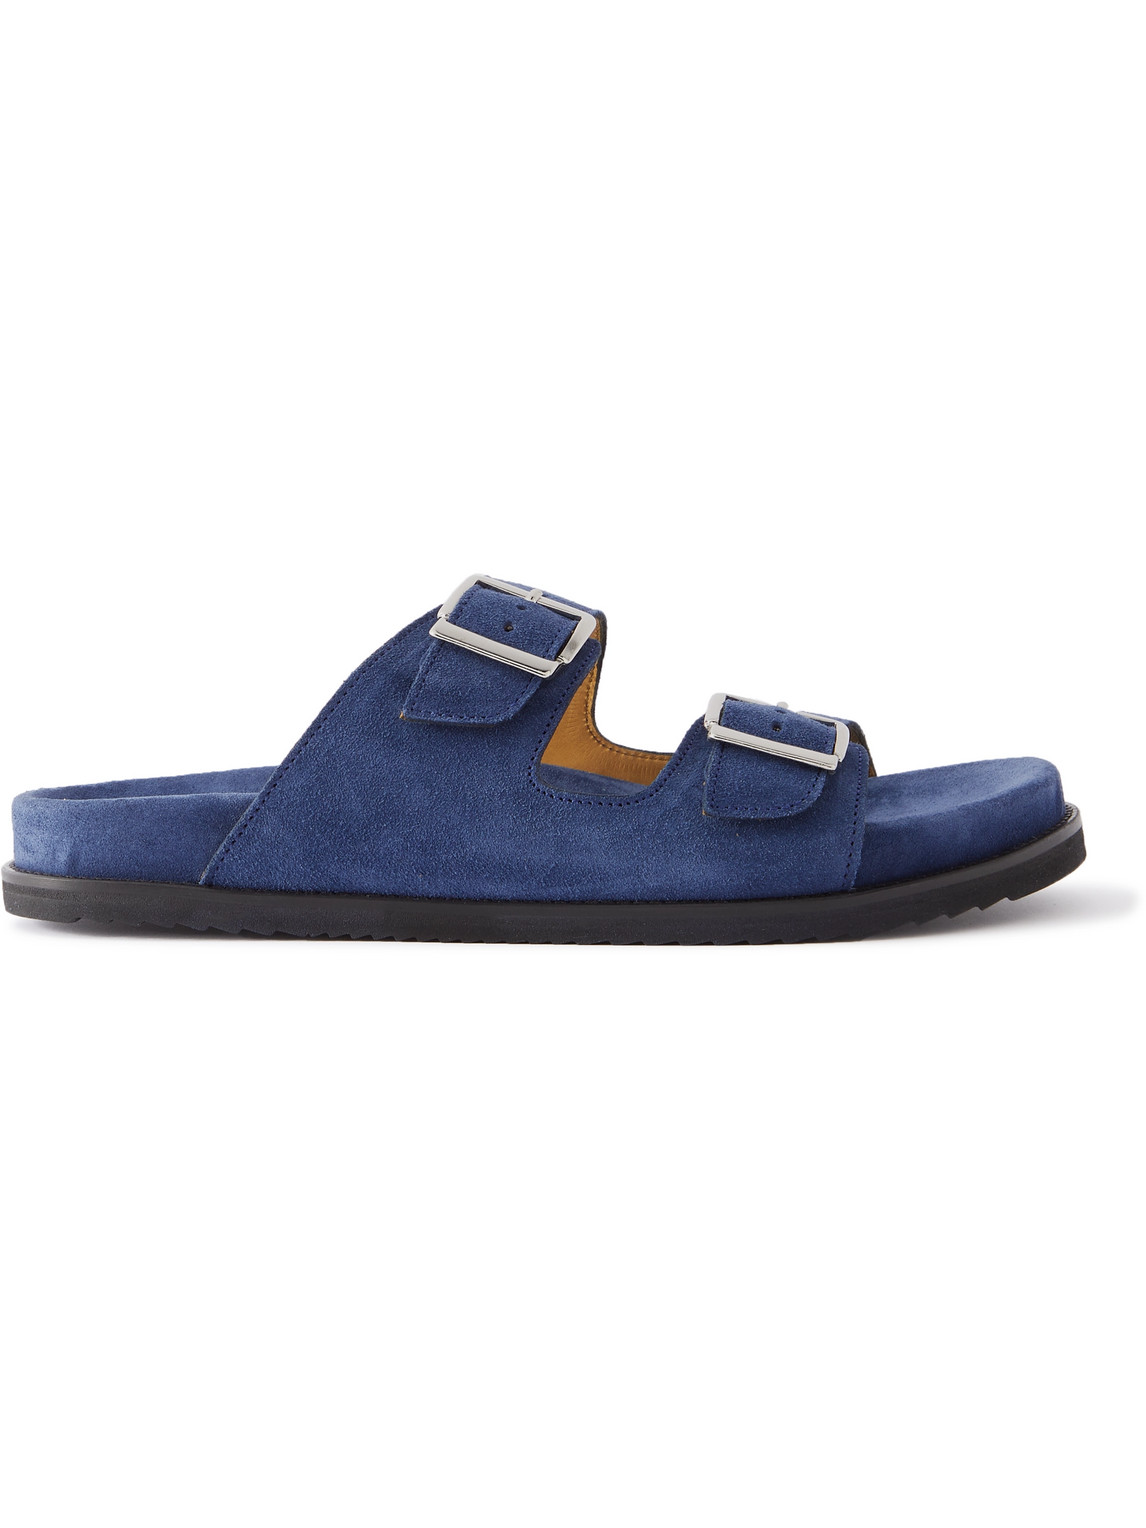 Mr P David Regenerated Suede By Evolo® Sandals In Blue